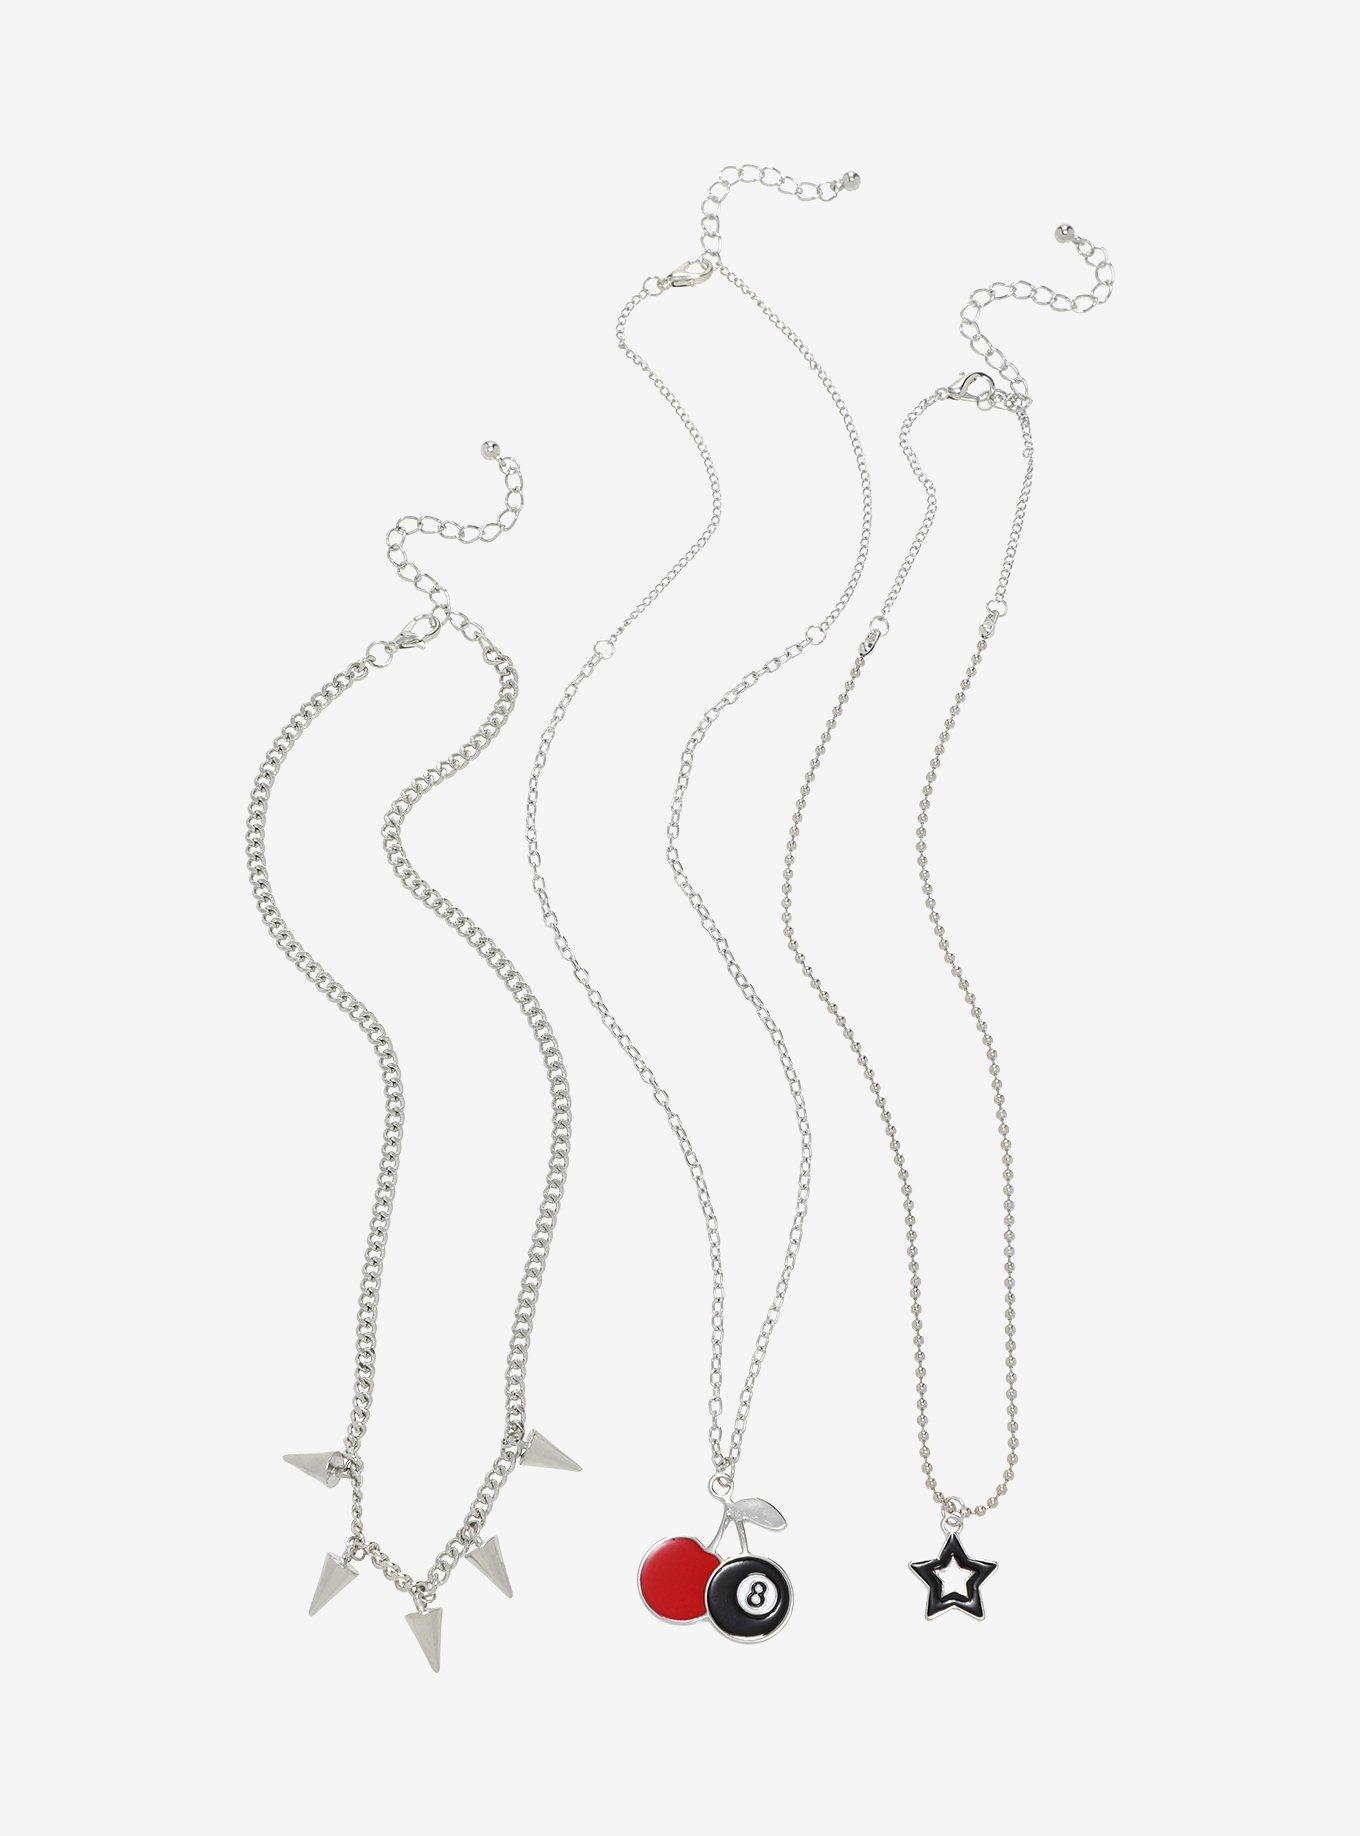 Social Collision® Spike Cherry 8 Ball Necklace Set, , alternate